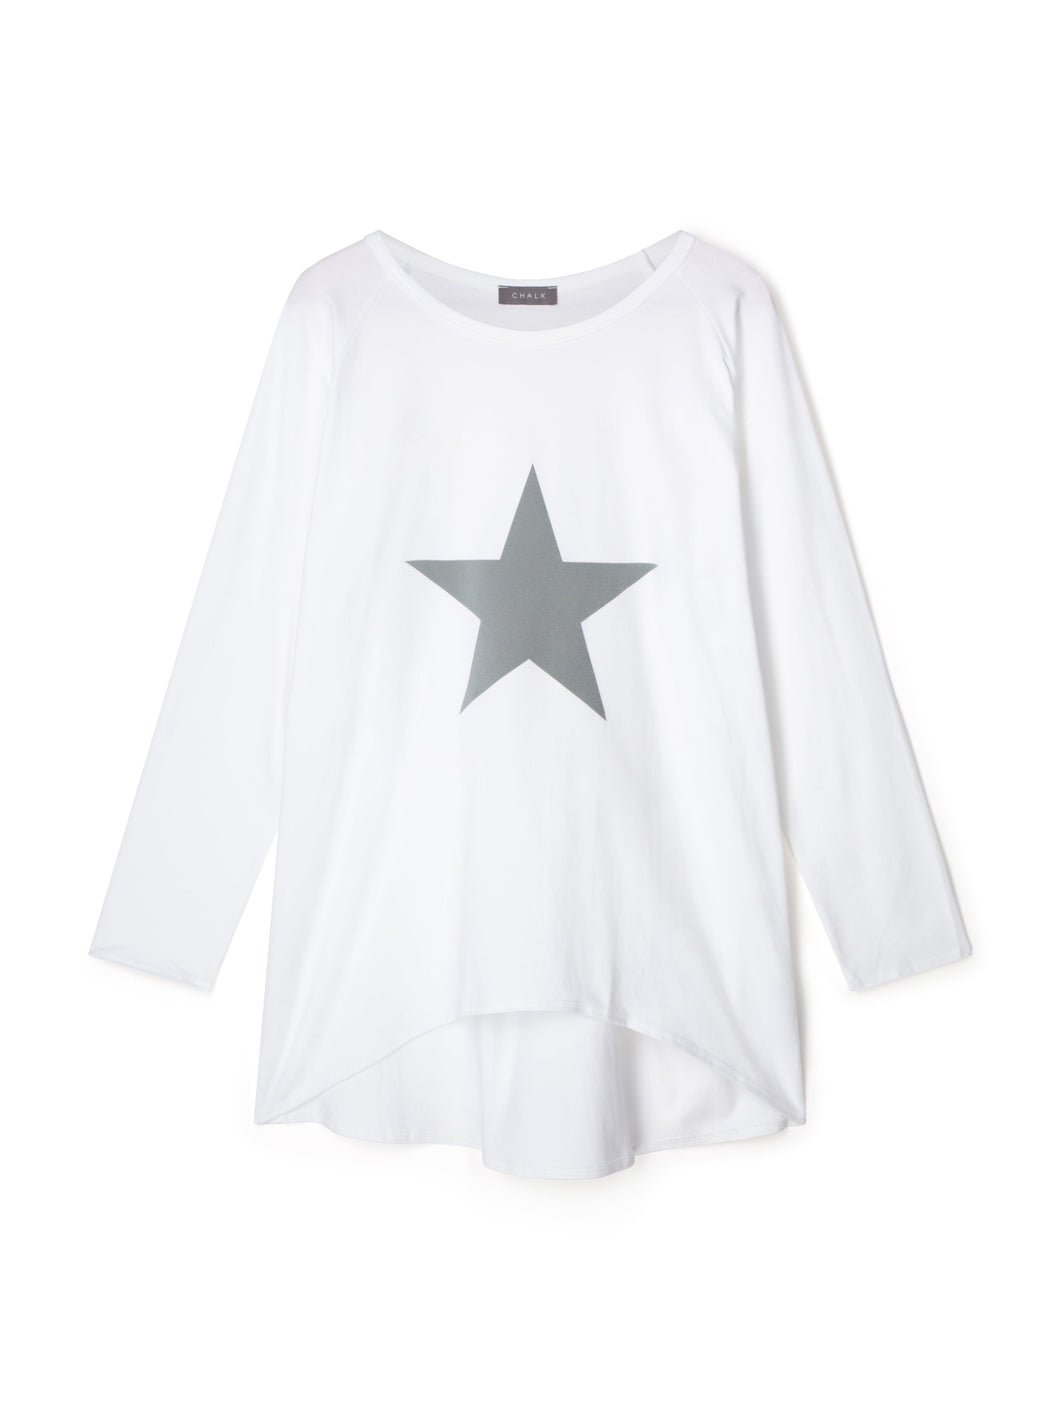 Chalk Robyn Top White with Light Grey Star